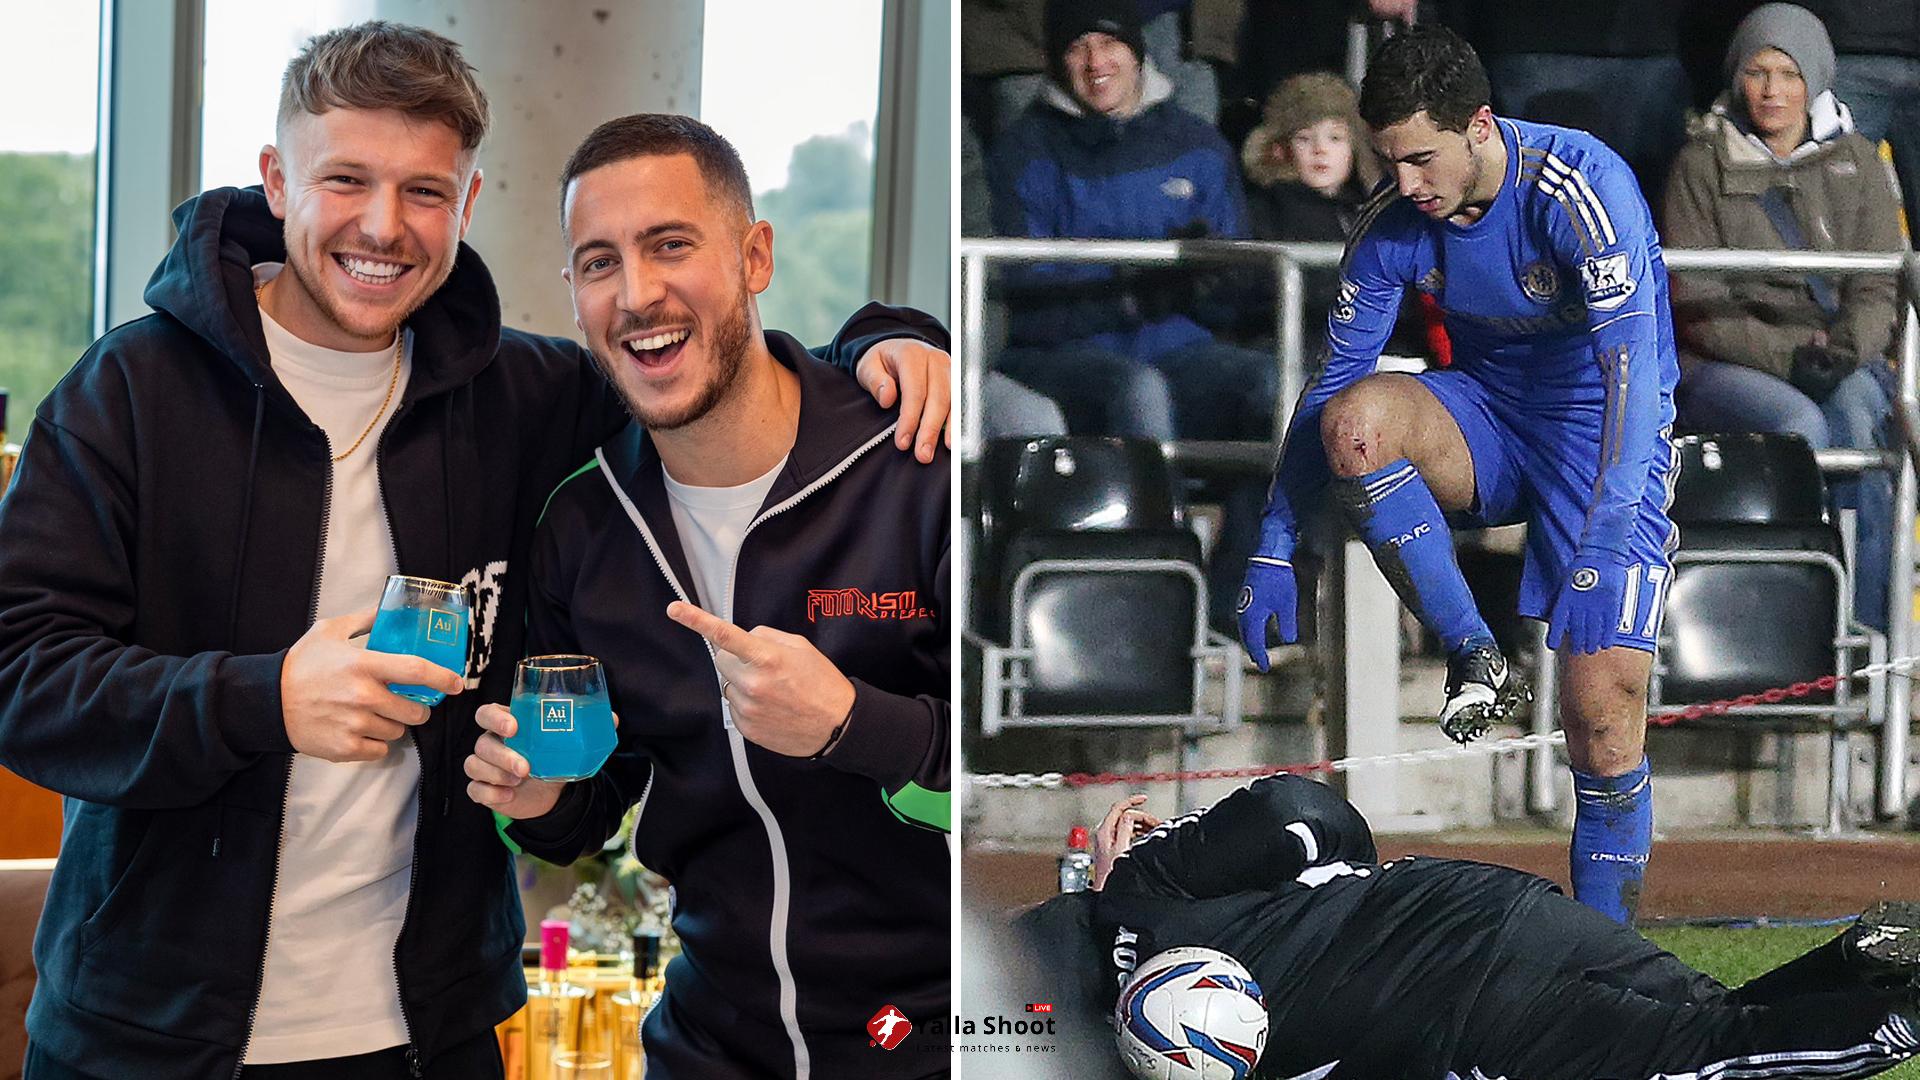 I was the ball boy ex-Chelsea star Eden Hazard kicked… now I’m worth £40m aged 27 and on Times Rich list